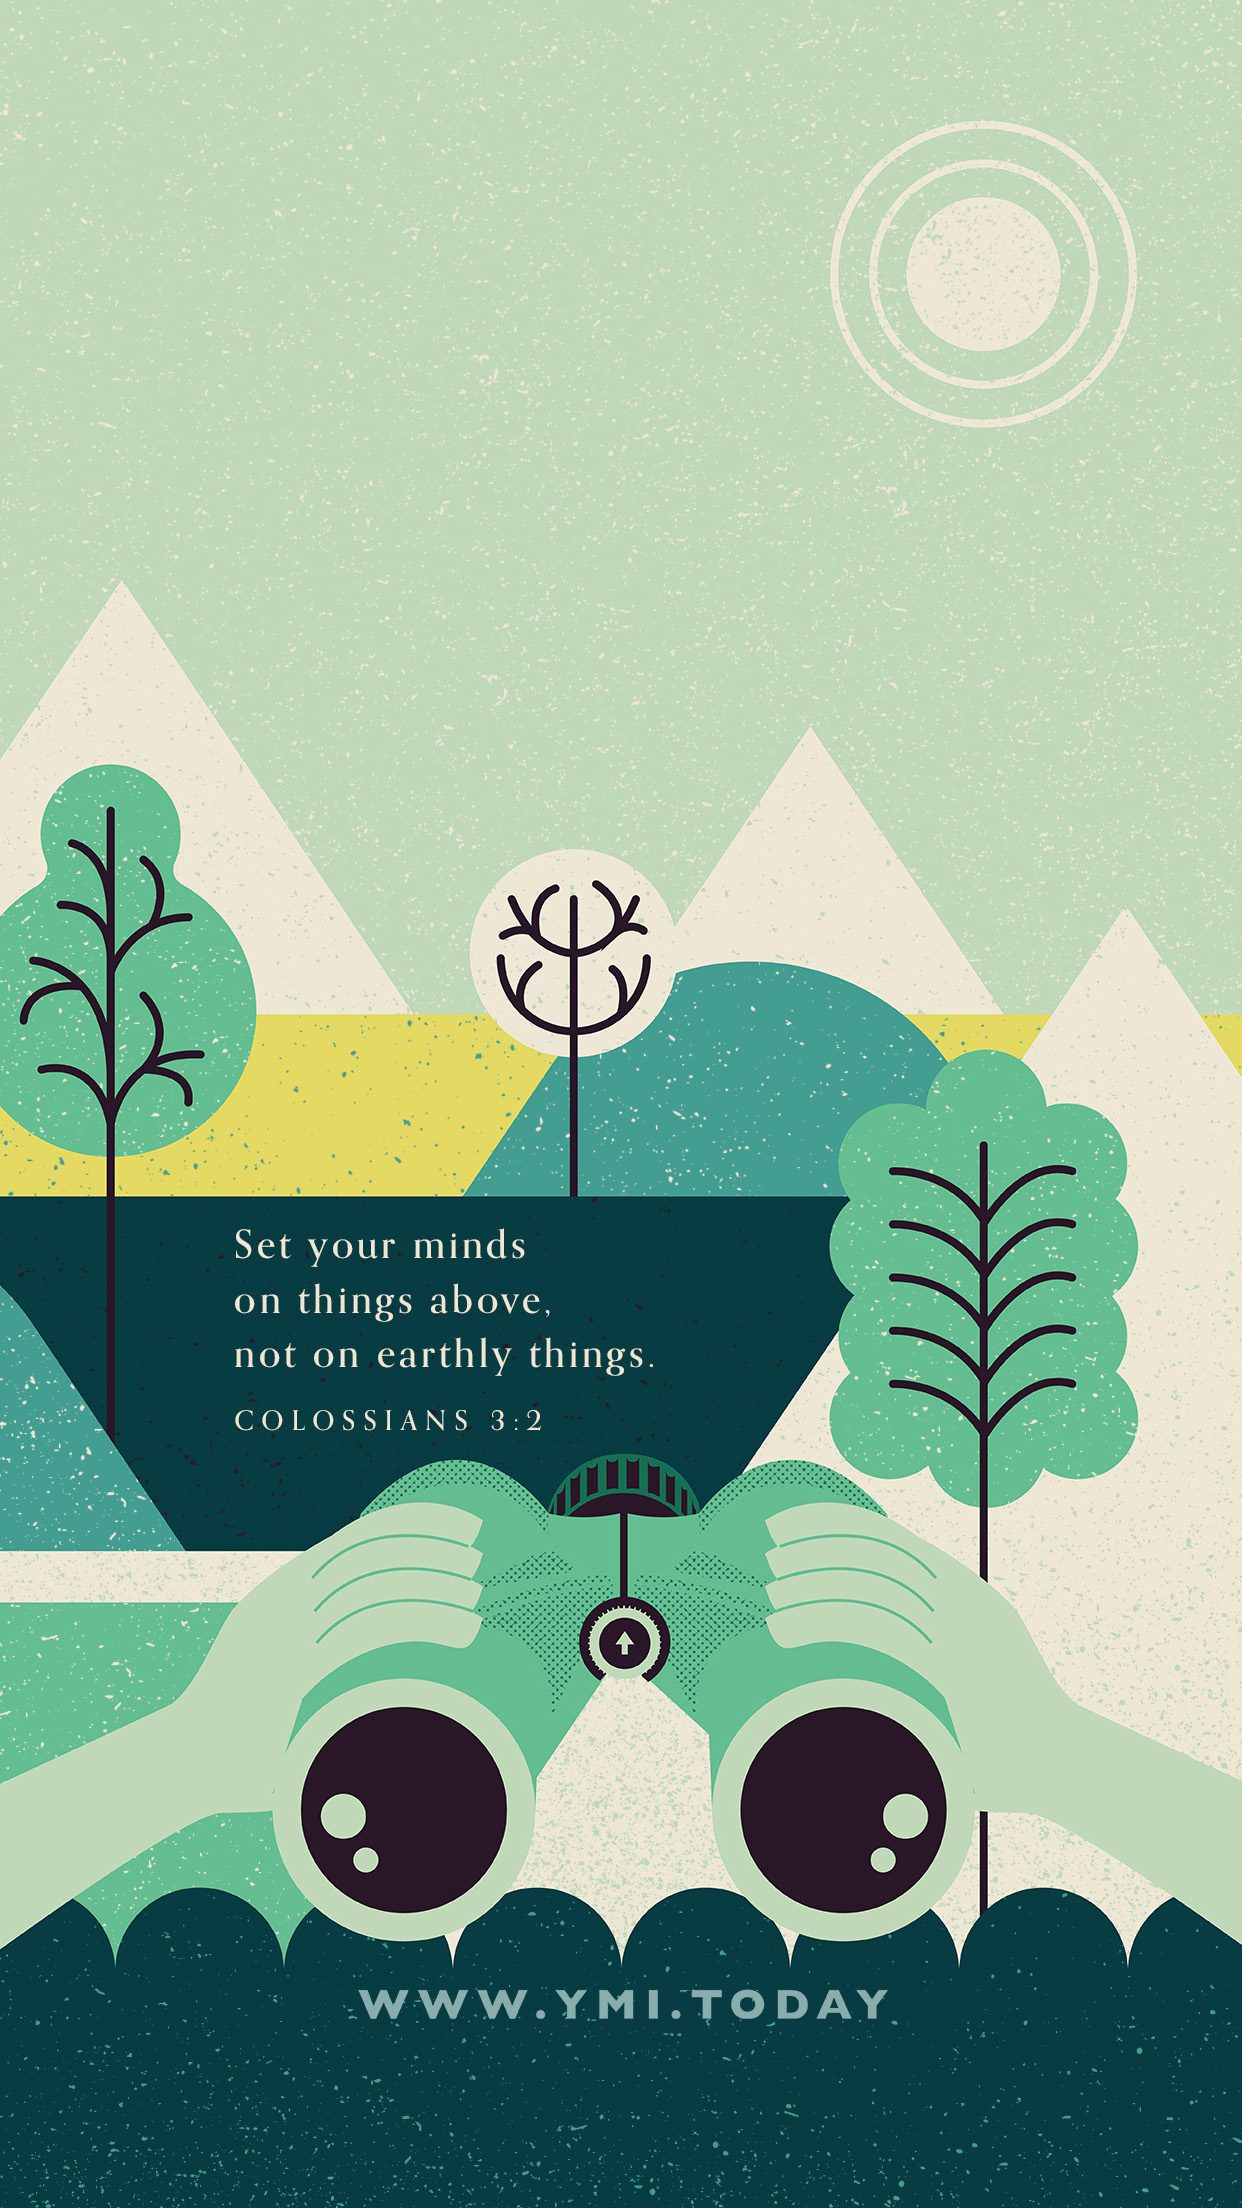 YMI September 2019 Phone Lockscreen - Set your minds on things above not on earthly things. - Colossians 3:2